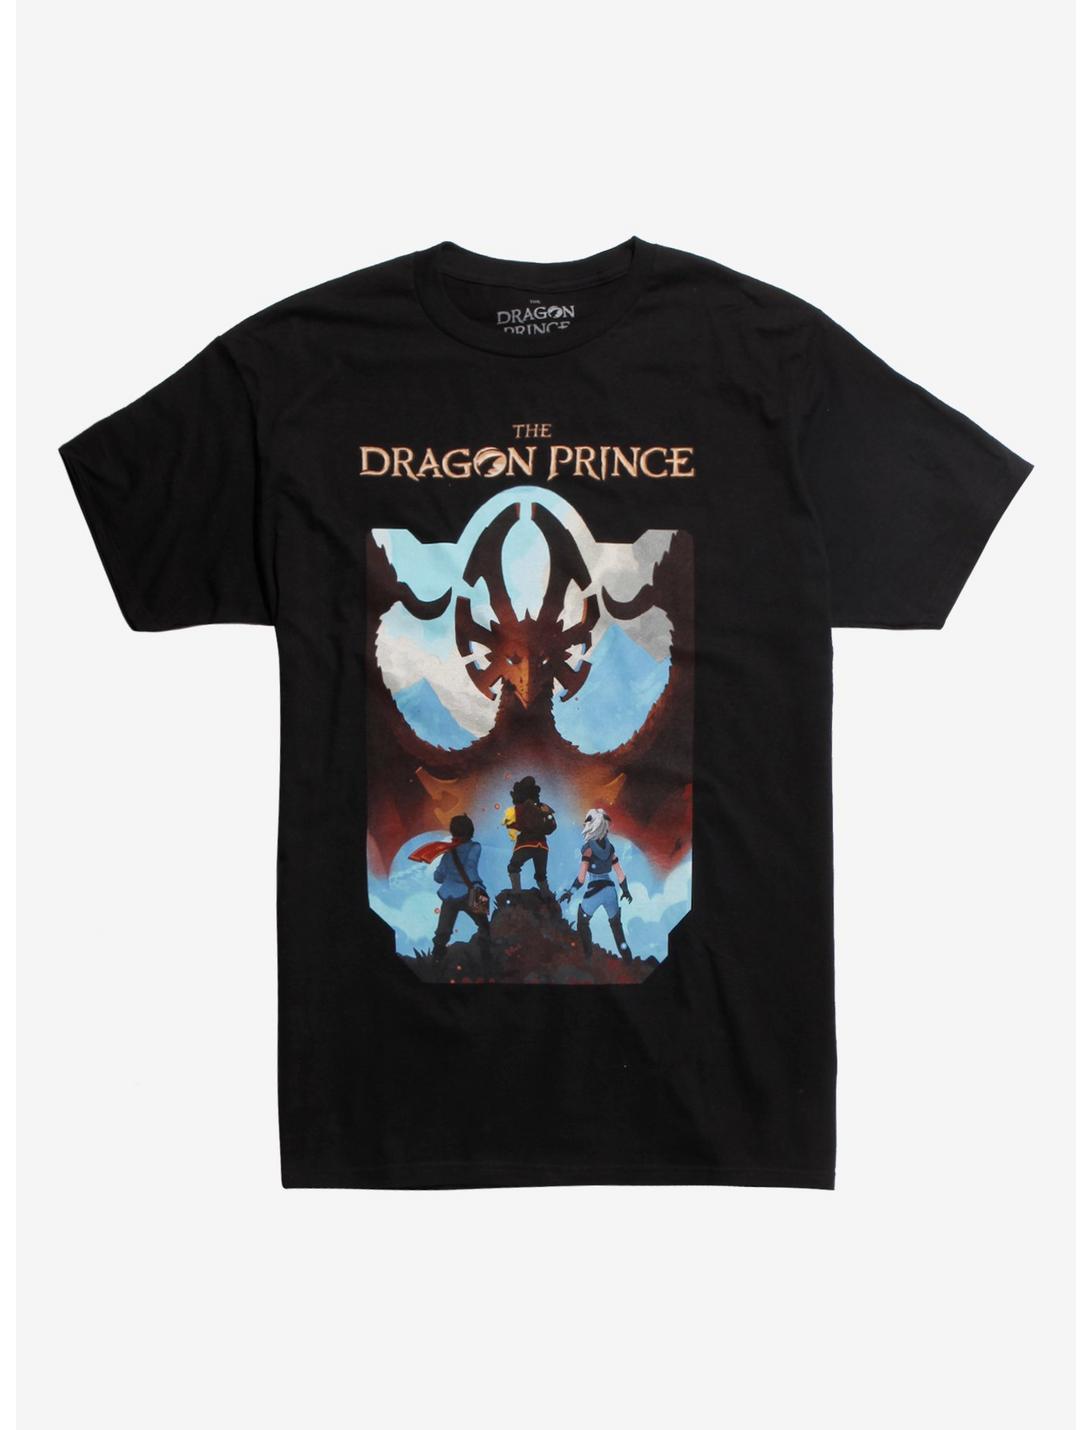 The Dragon Prince Poster T-Shirt Hot Topic Exclusive, BLACK, hi-res